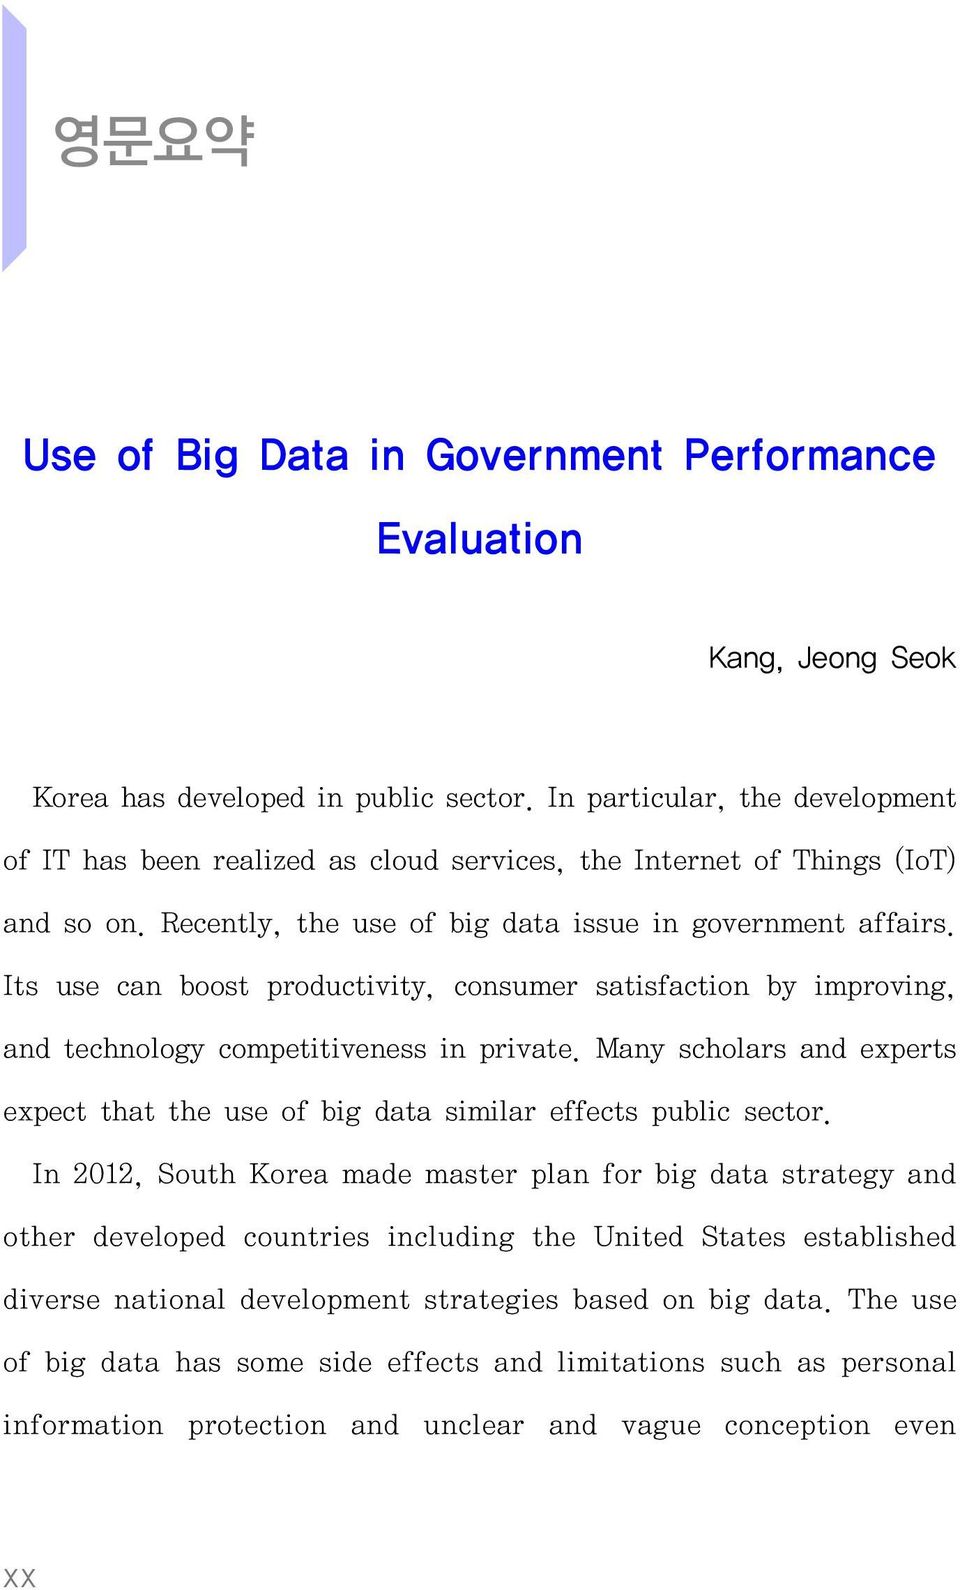 Its use can boost productivity, consumer satisfaction by improving, and technology competitiveness in private. Many scholars and experts expect that the use of big data similar effects public sector.